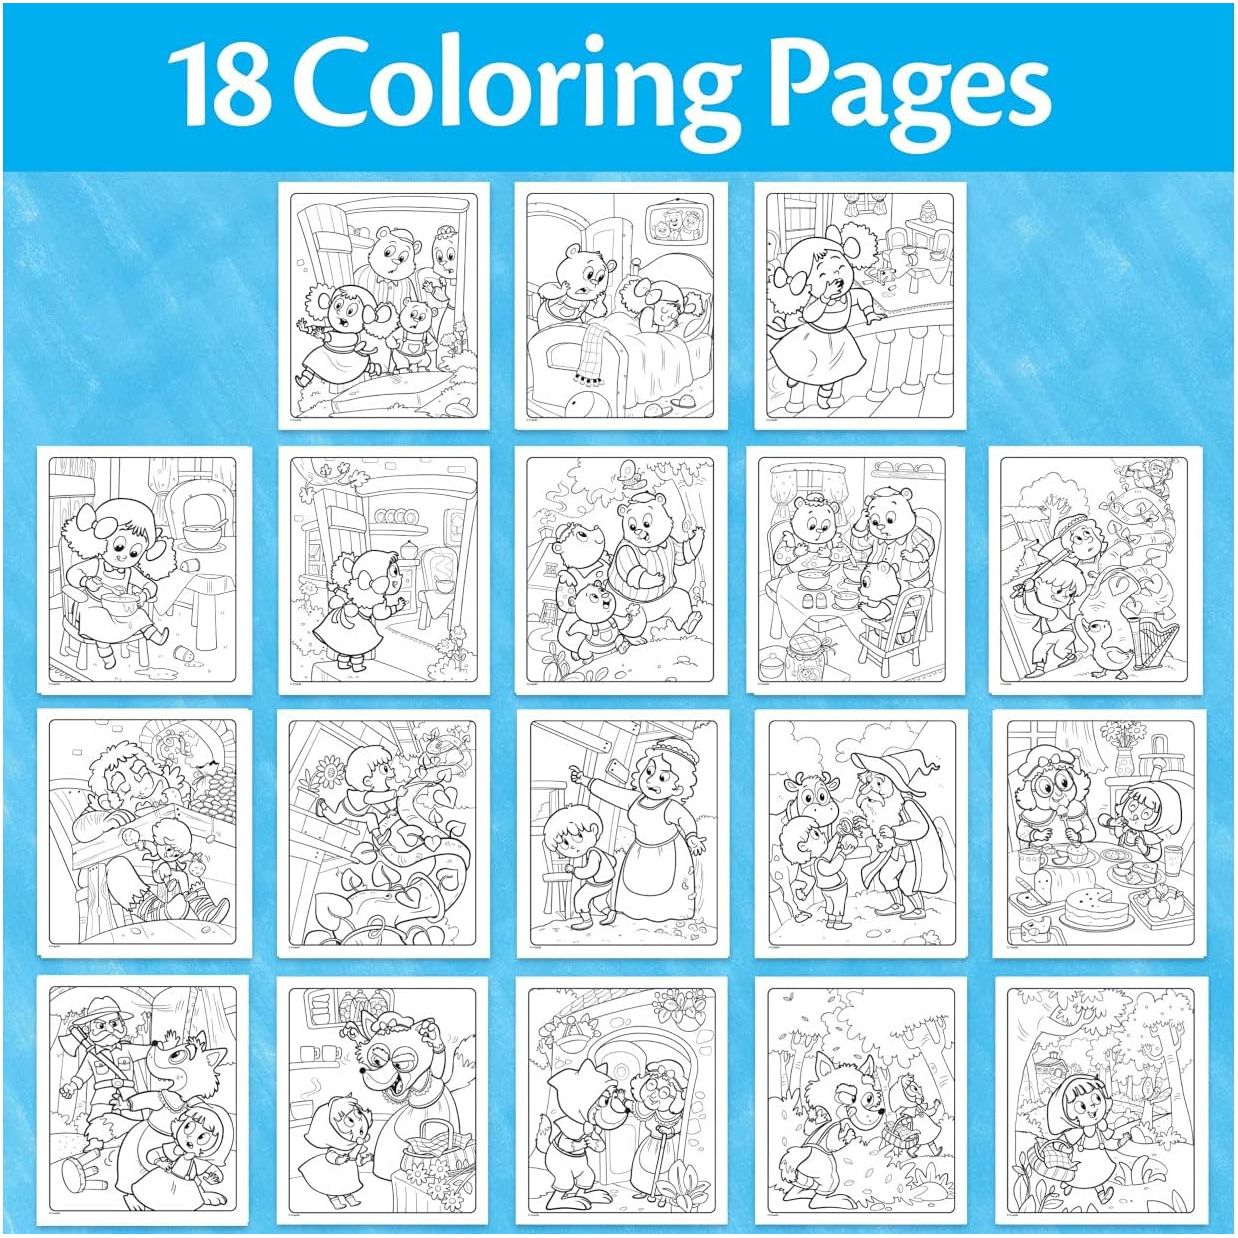 Crayola Color Wonder Fairytales (18 Pages), Mess Free Coloring for Kids & Toddlers